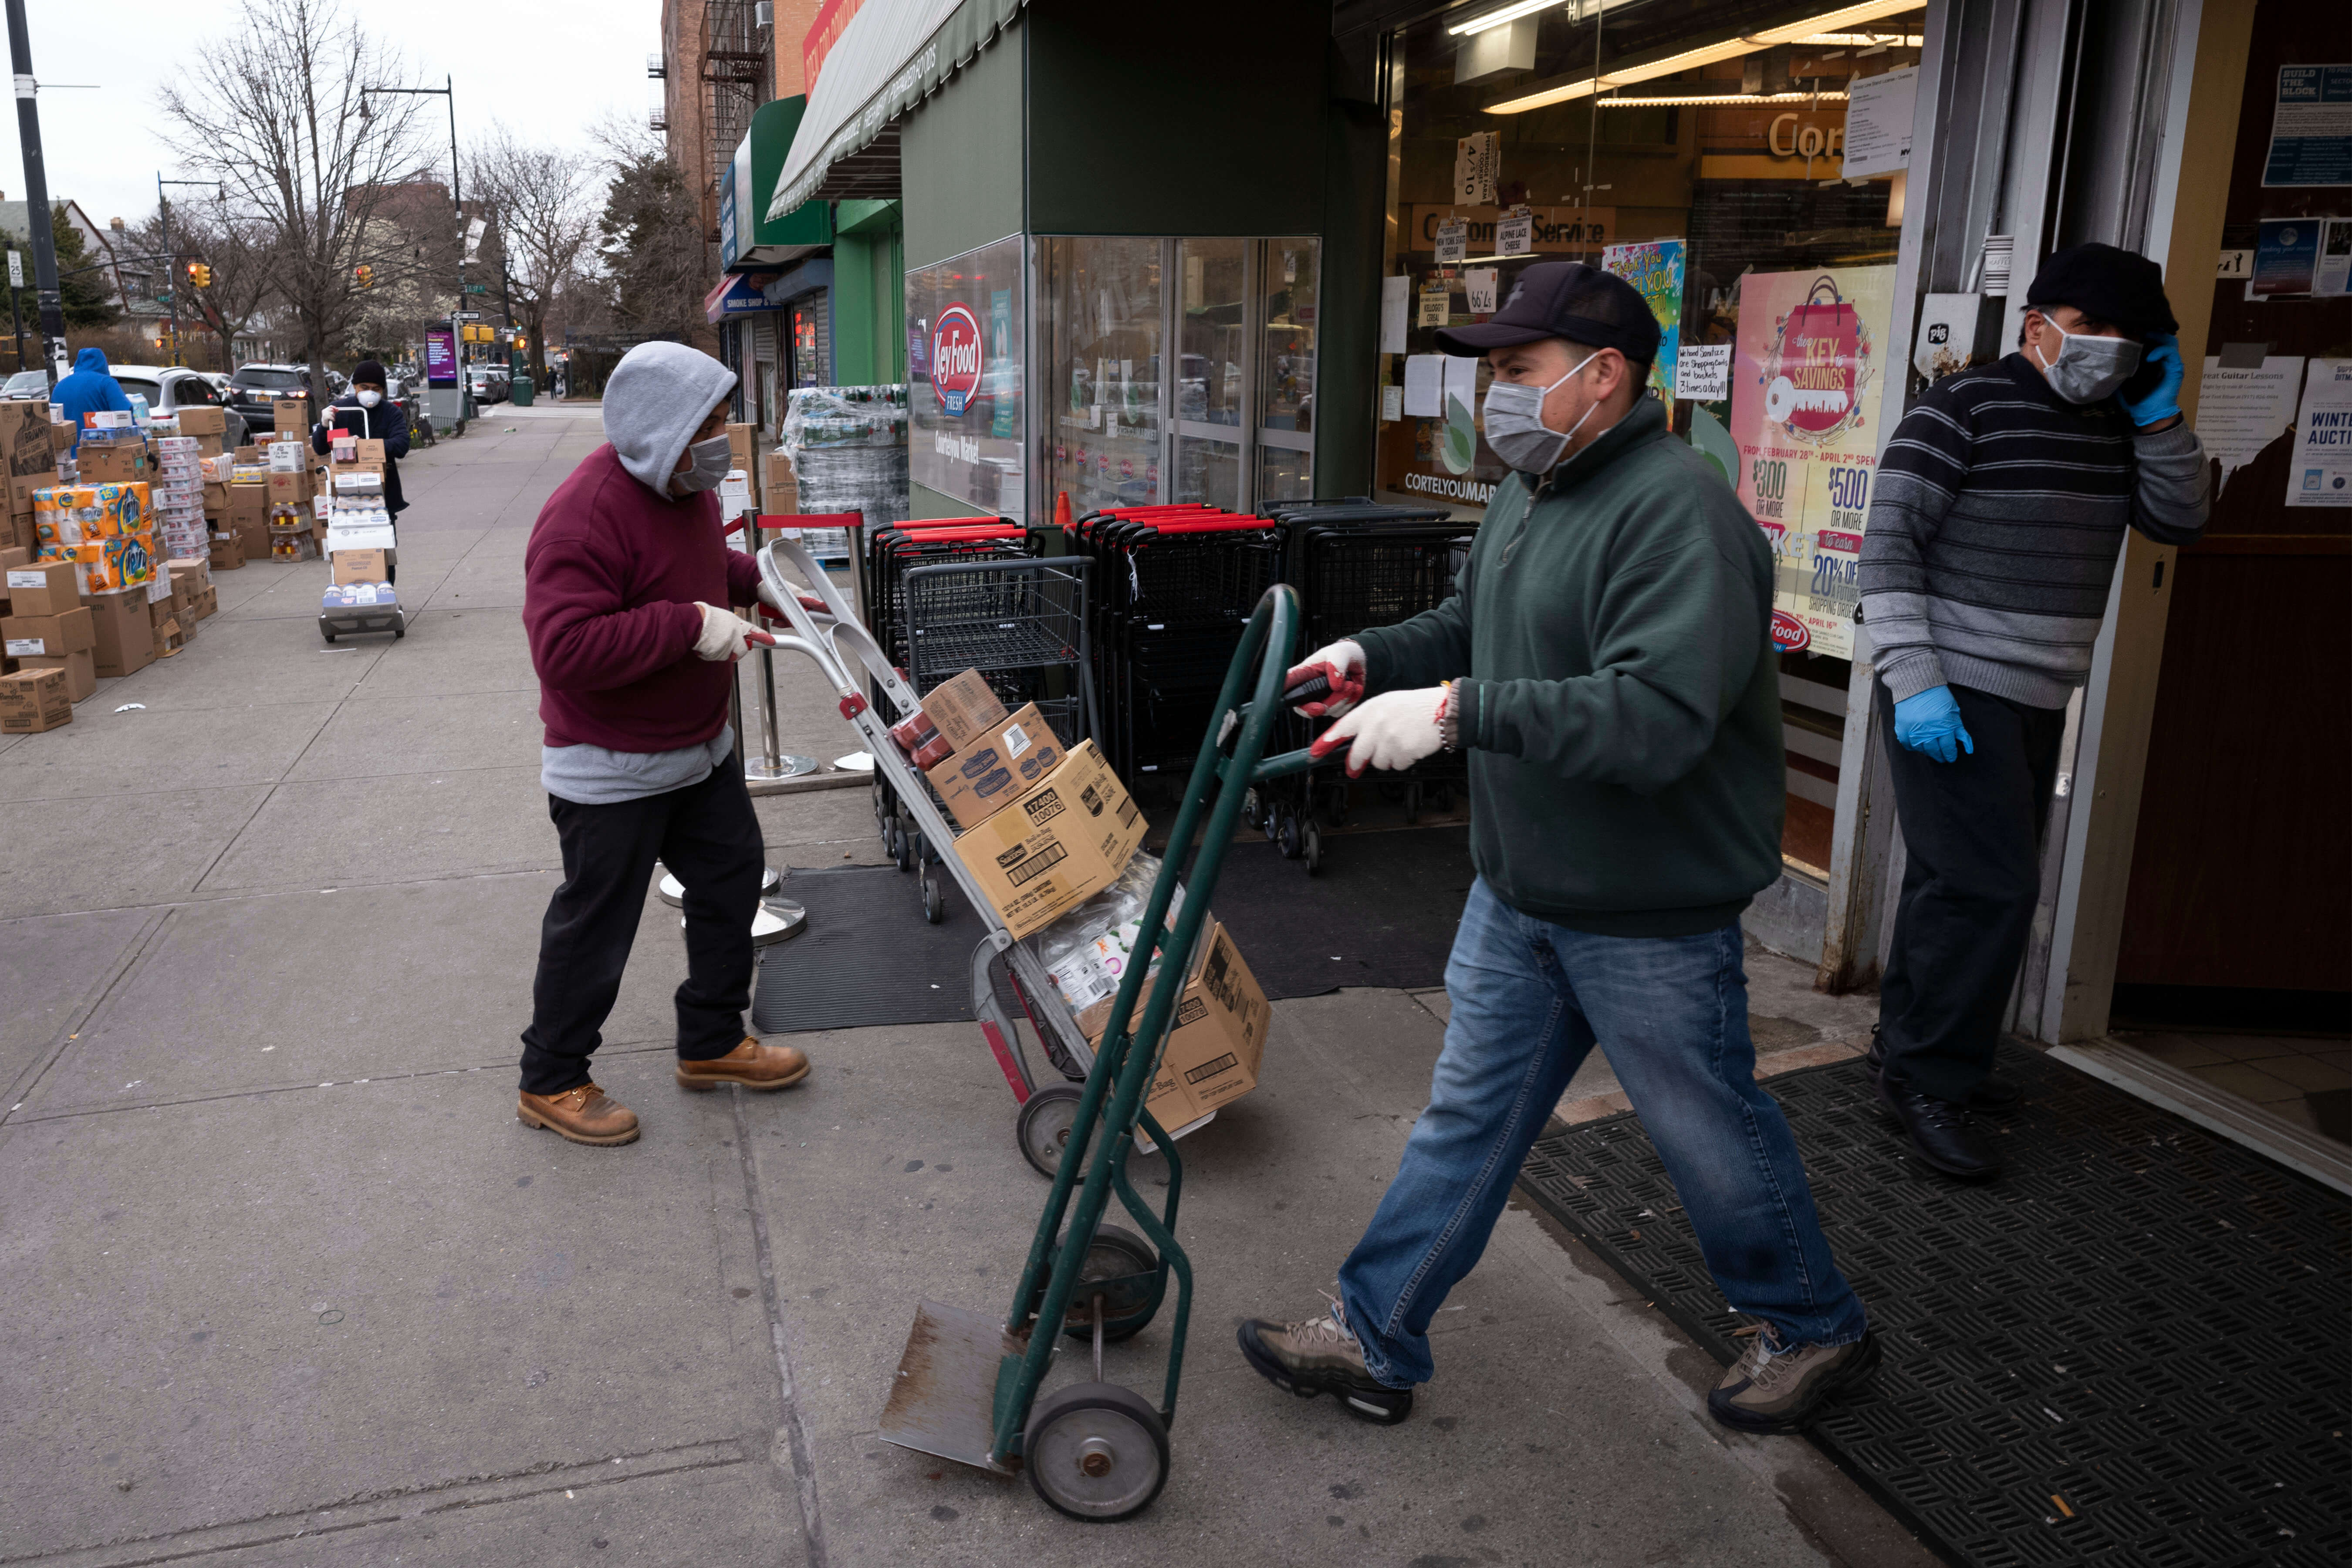 Supermarket workers wearing masks use hand carts to move food into the store during the coronavirus pandemic in the Brooklyn borough of New York. (March 2020)